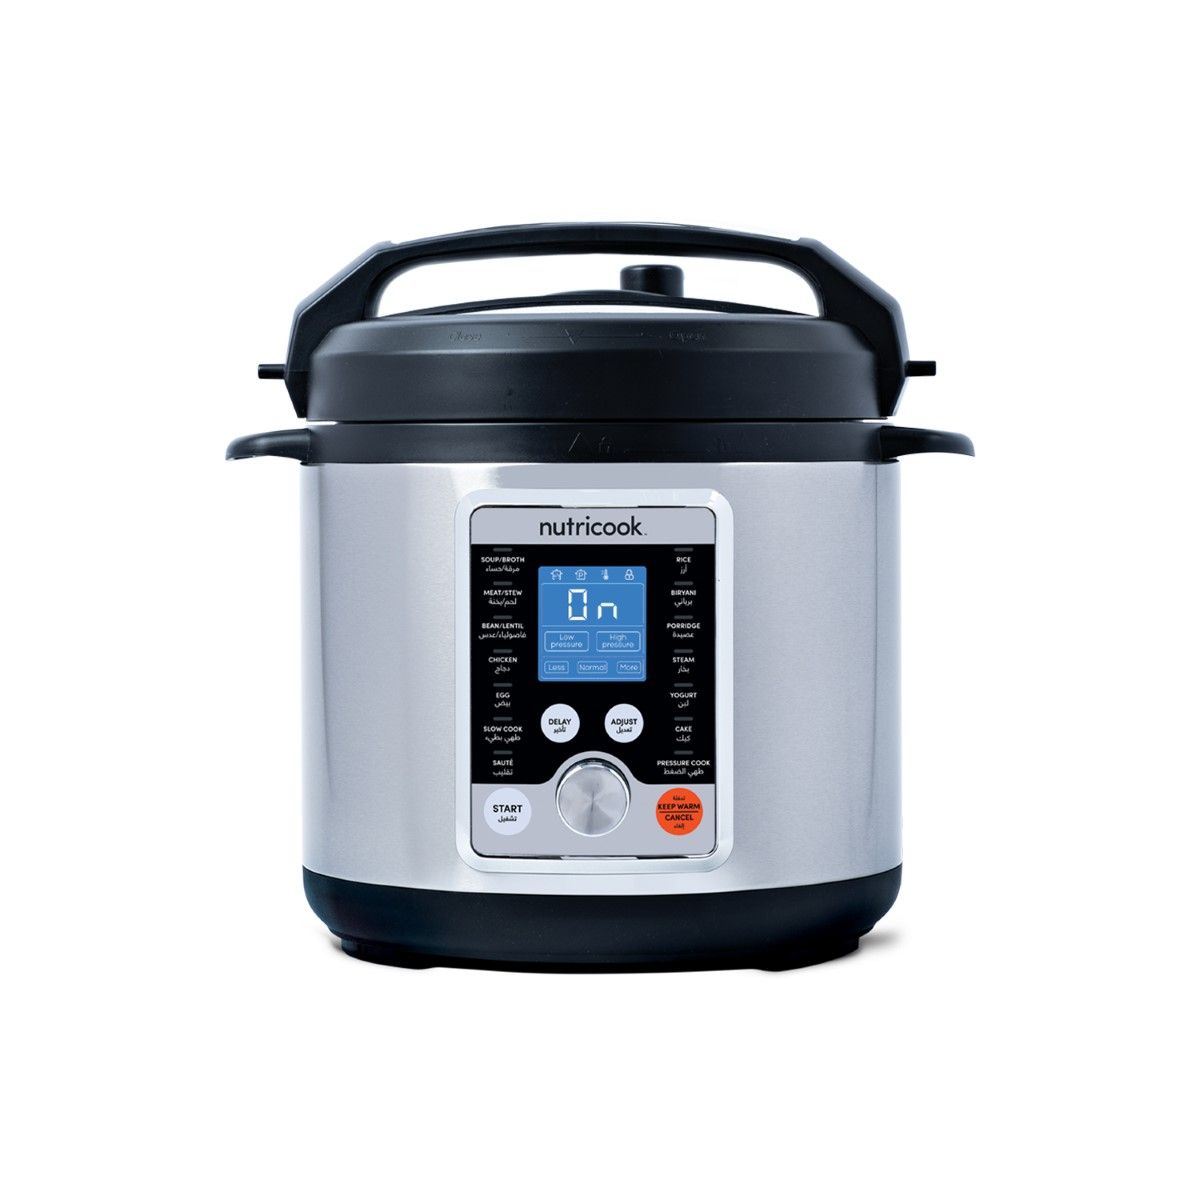 NutriCook Smart Pot Pro+ 10-in-1 Electric Cooker - 6L